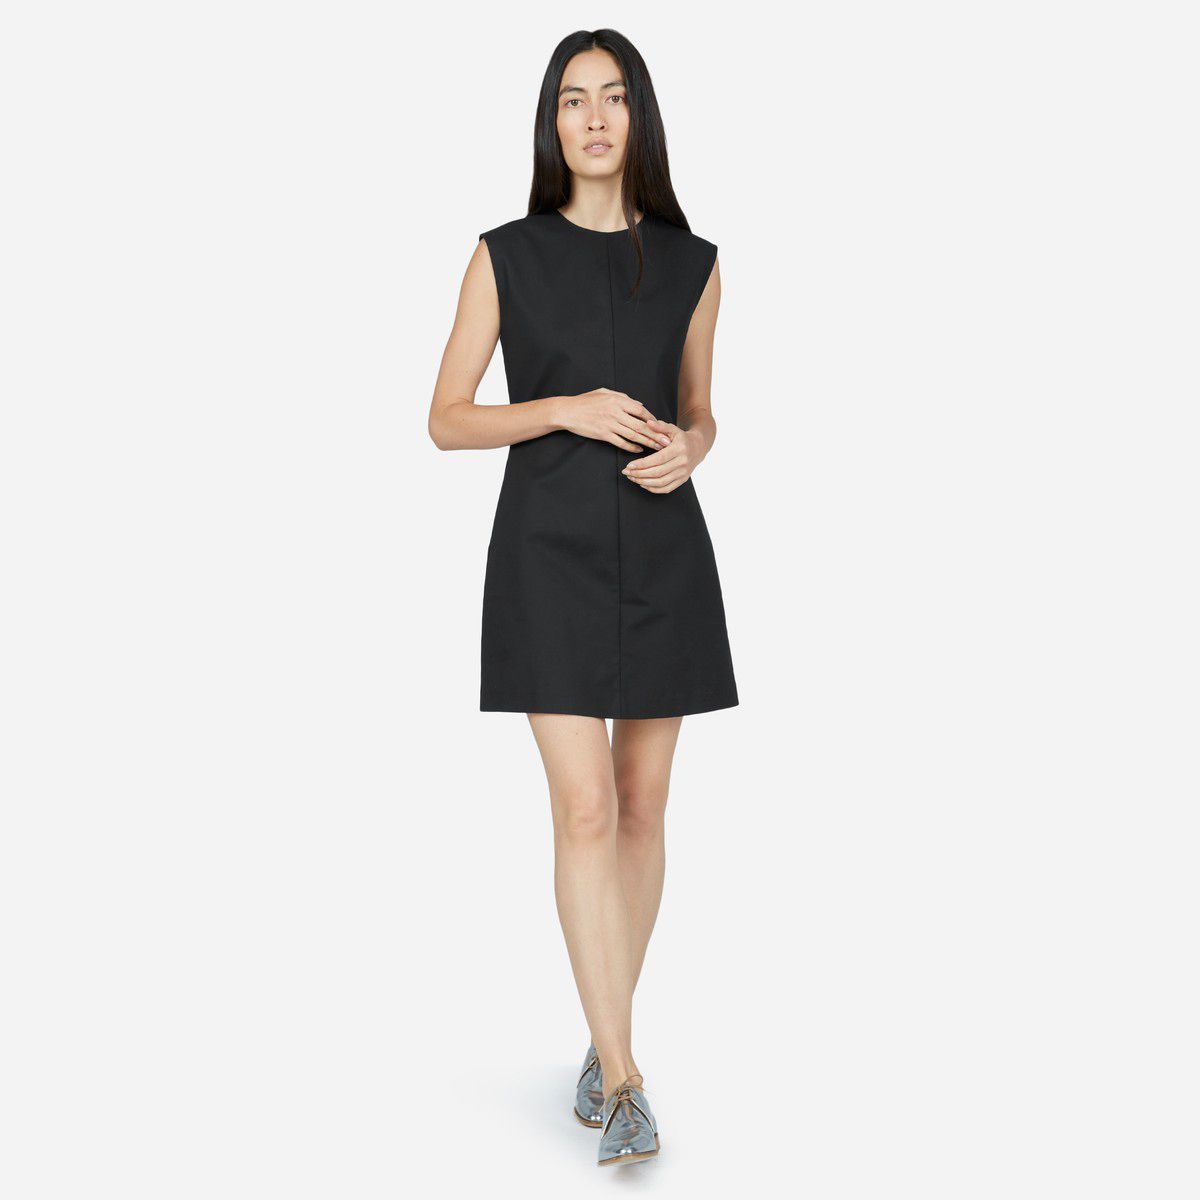 A model wearing an Everlane black flare dress with pockets